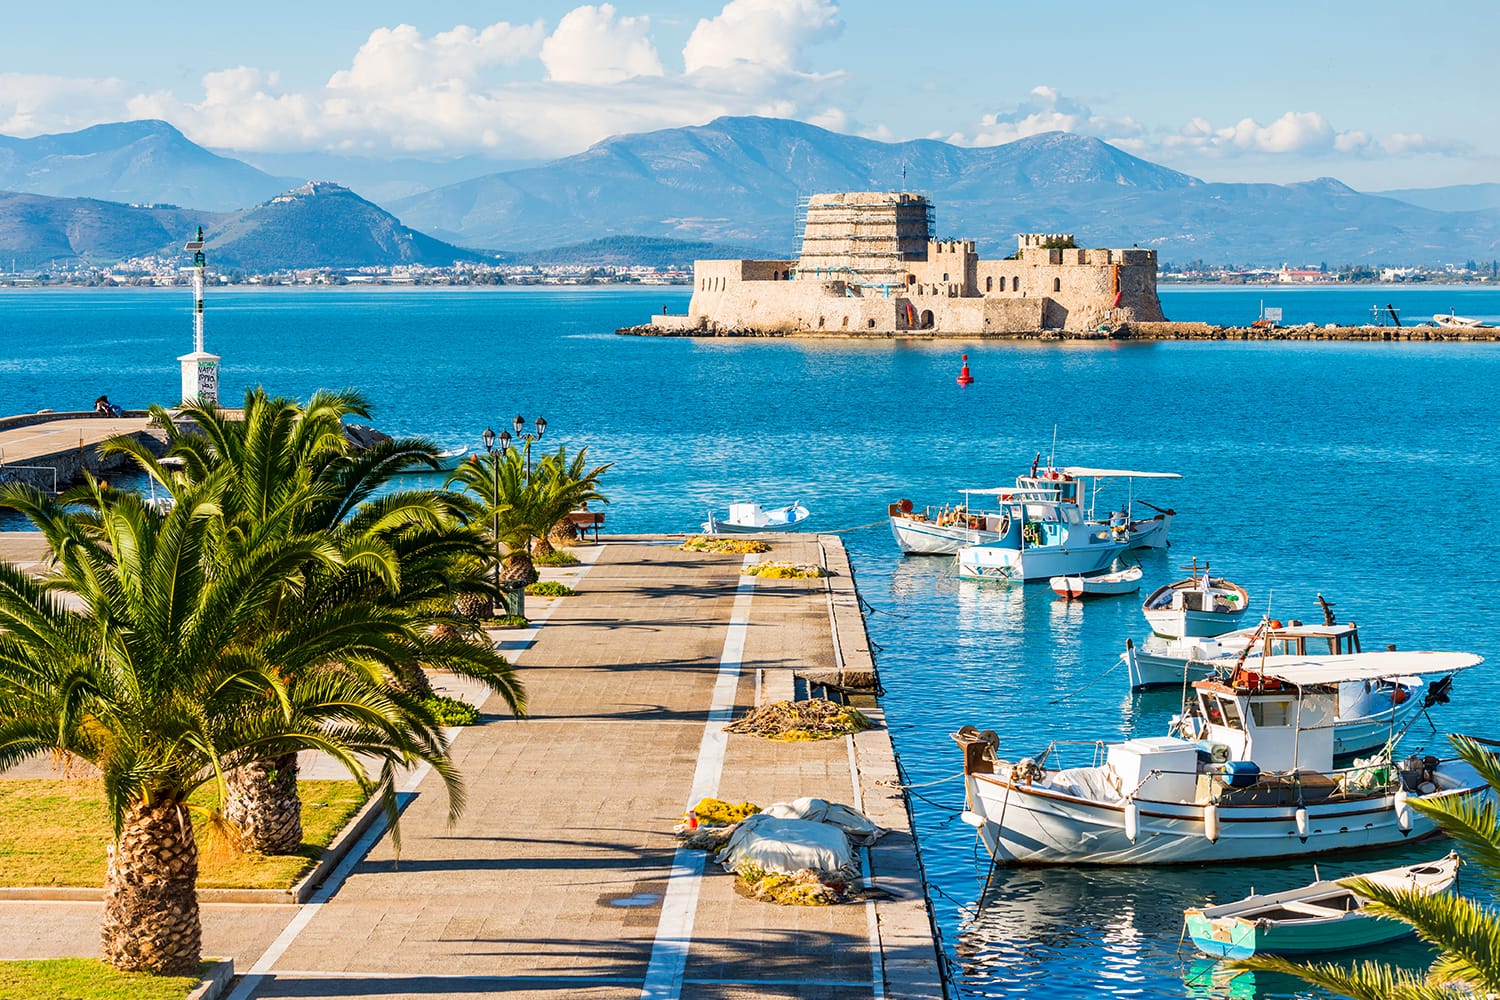 Beautiful port of Nafplio city in Greece with small boats, palm trees and Bourtzi castle on the water